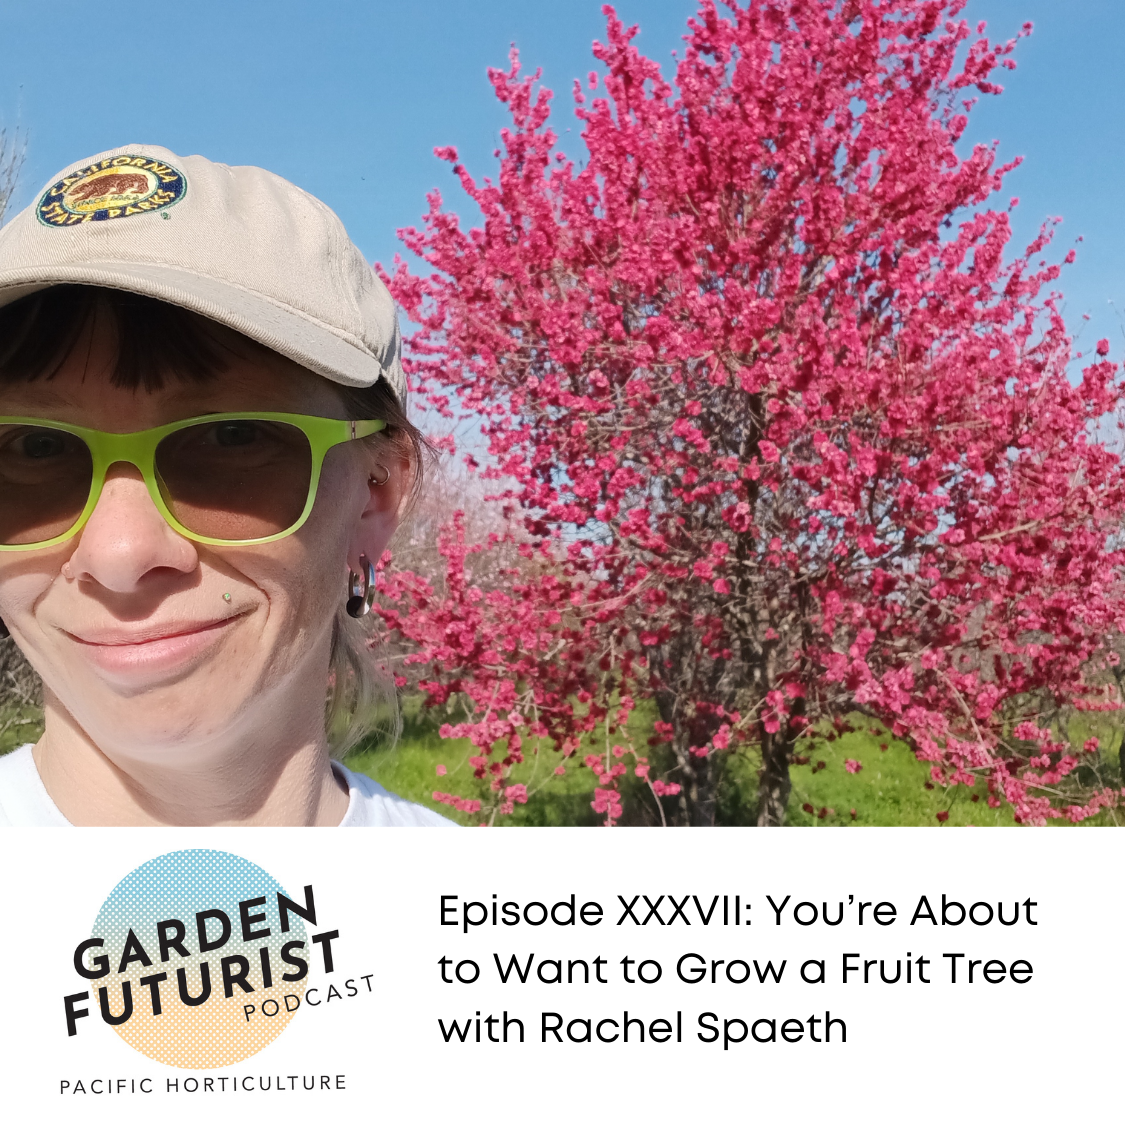 Garden Futurist Podcast: Episode XXXVII: You’re About to Want to Grow a Fruit Tree with Rachel Spaeth